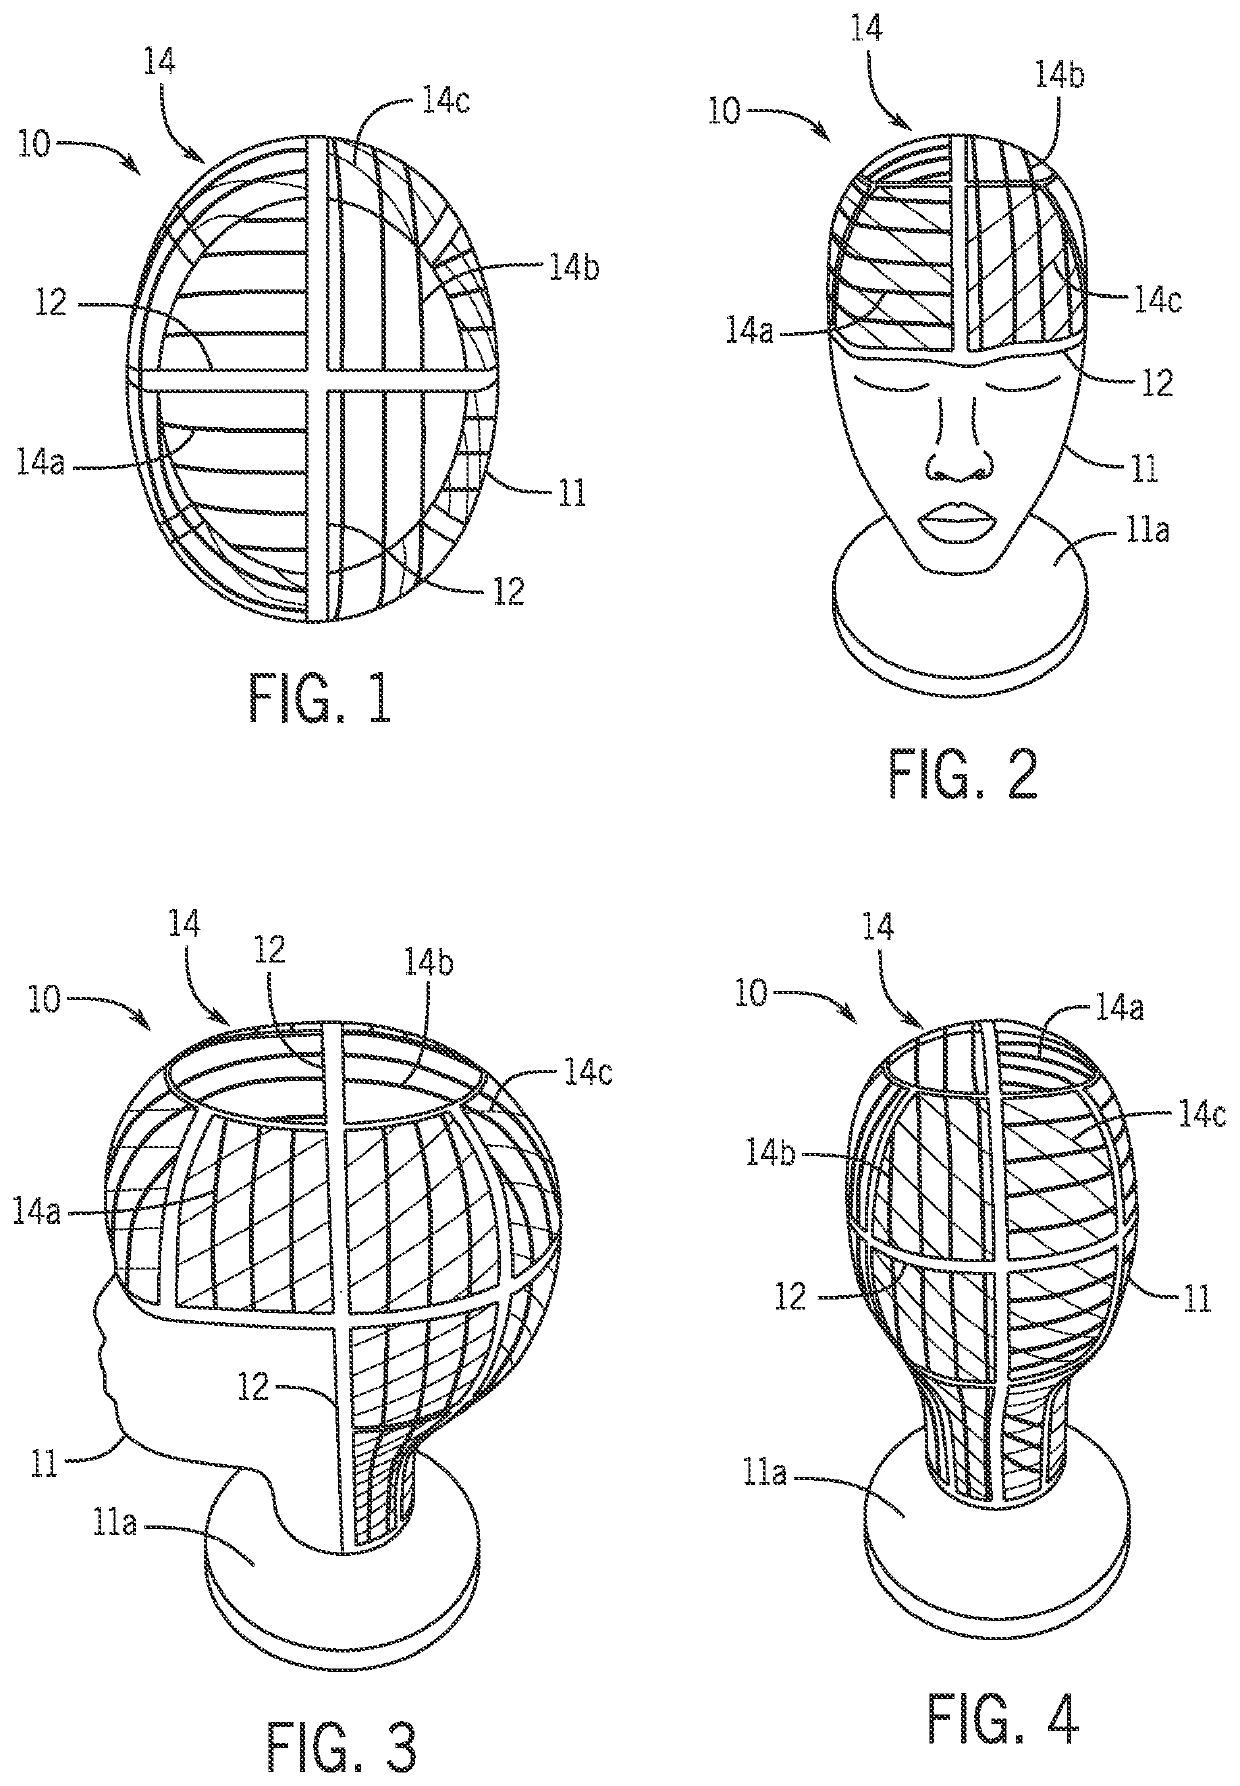 Educational hairstyling apparatus, system, and method